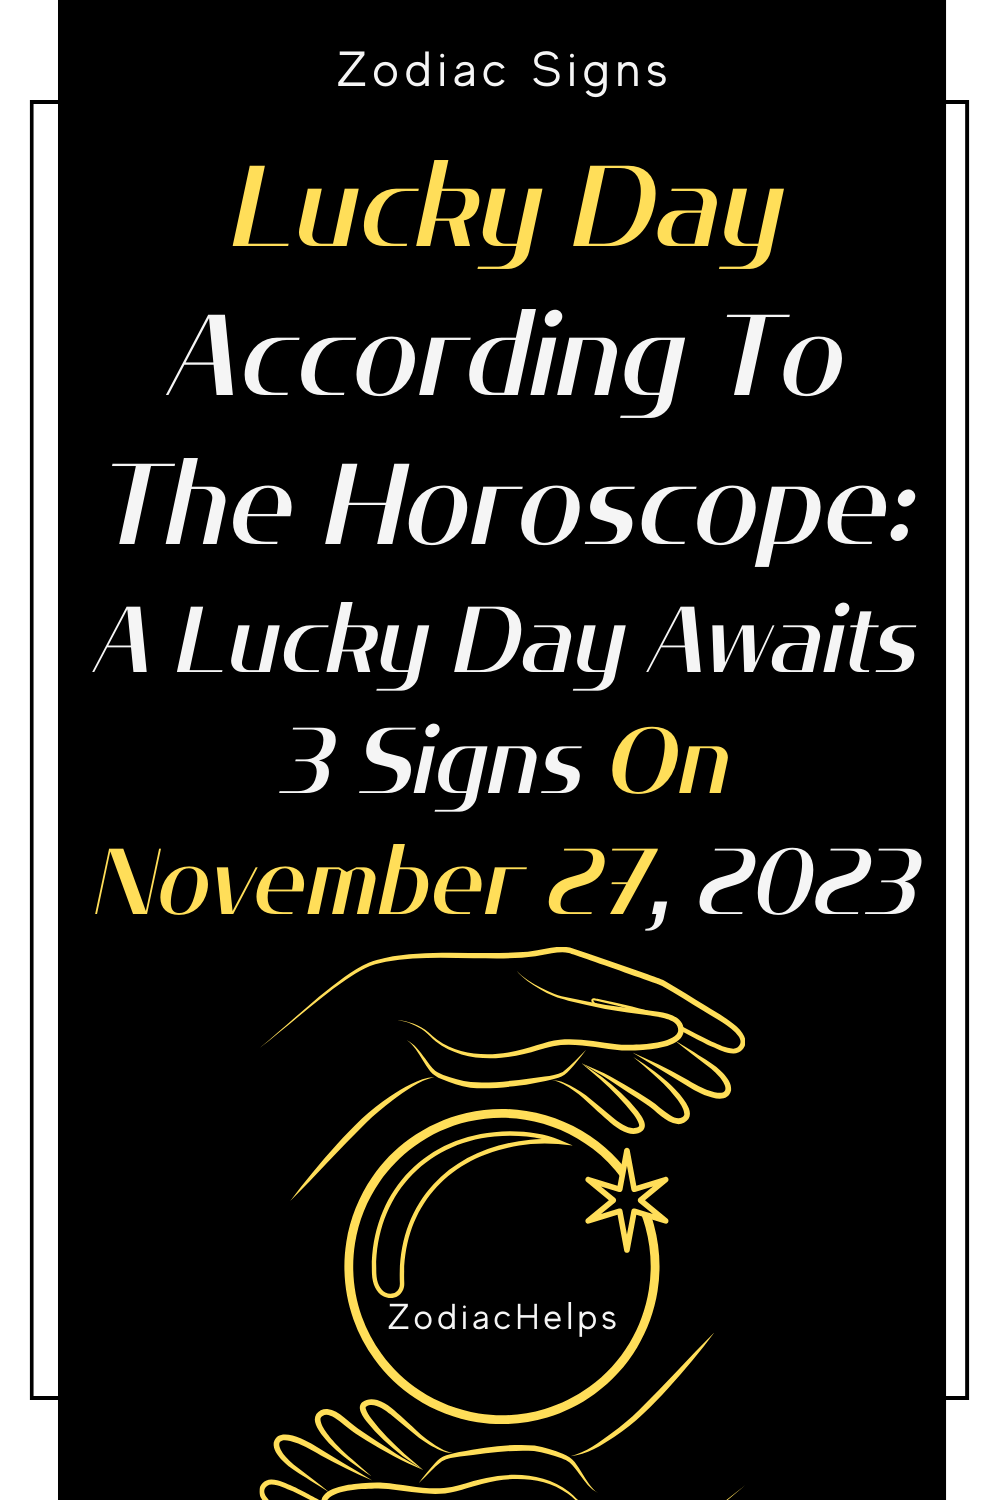 Lucky Day According To The Horoscope: A Lucky Day Awaits 3 Signs On November 27, 2023